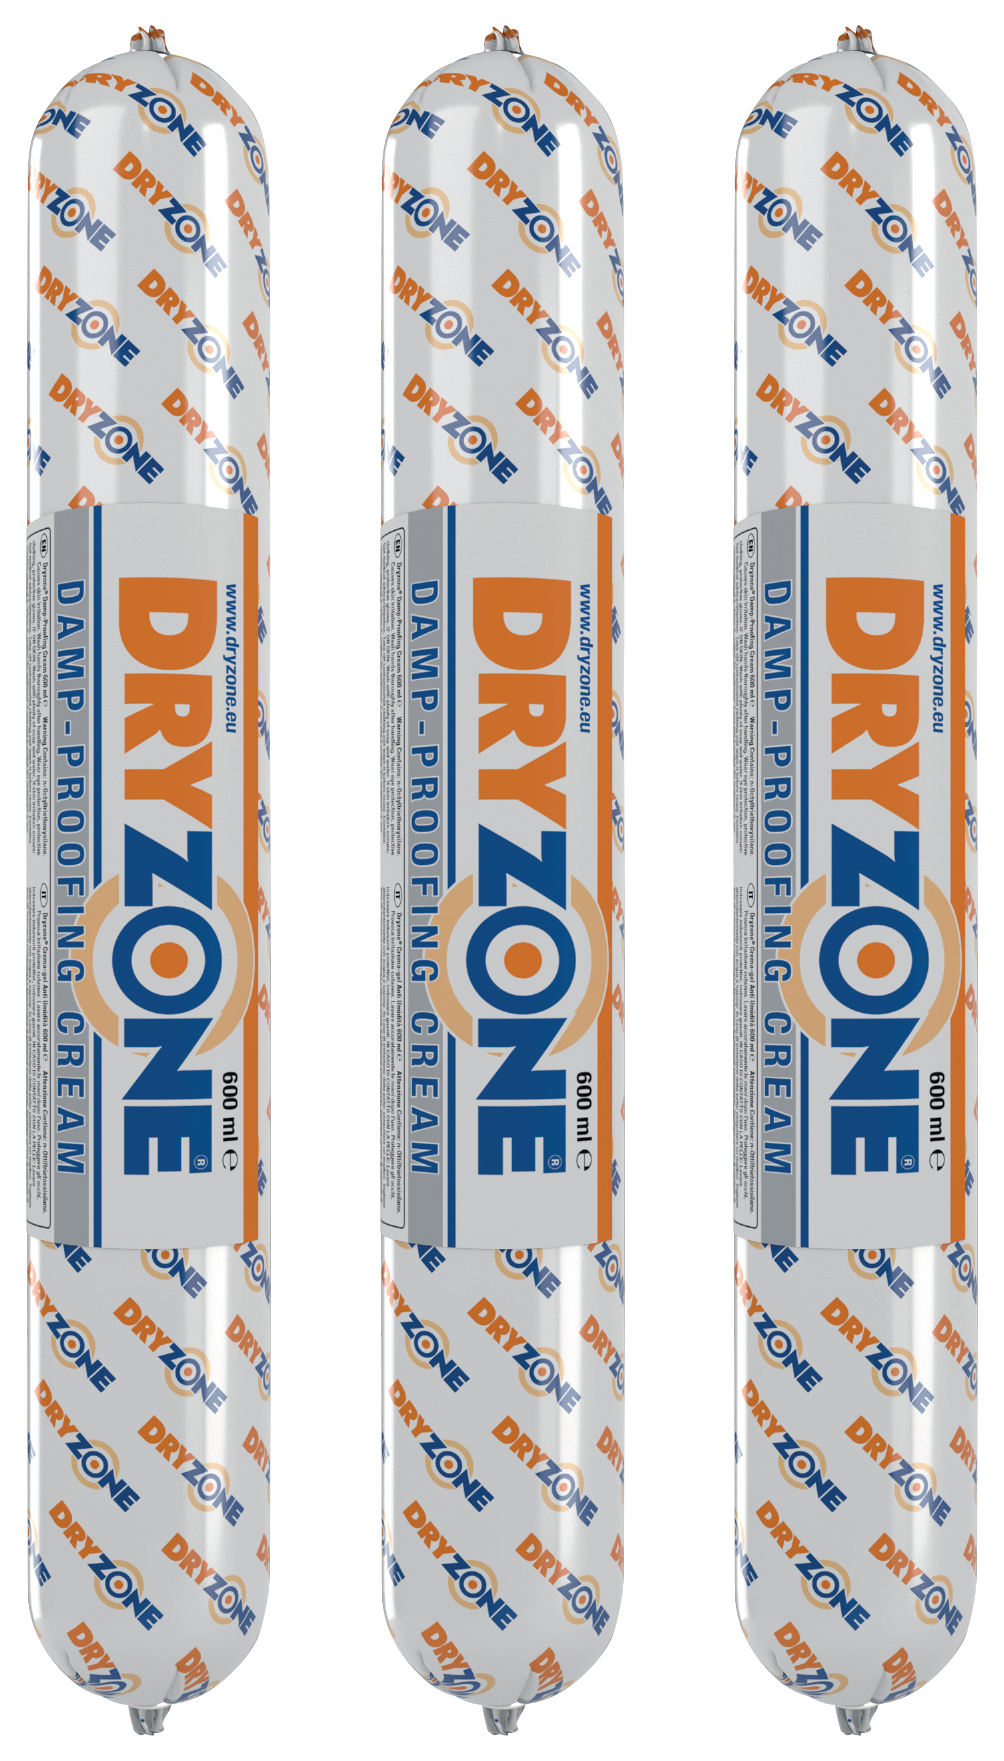 Dryzone Damp Proof Course Cream Foil Cartridge - 600ml - Pack of 3